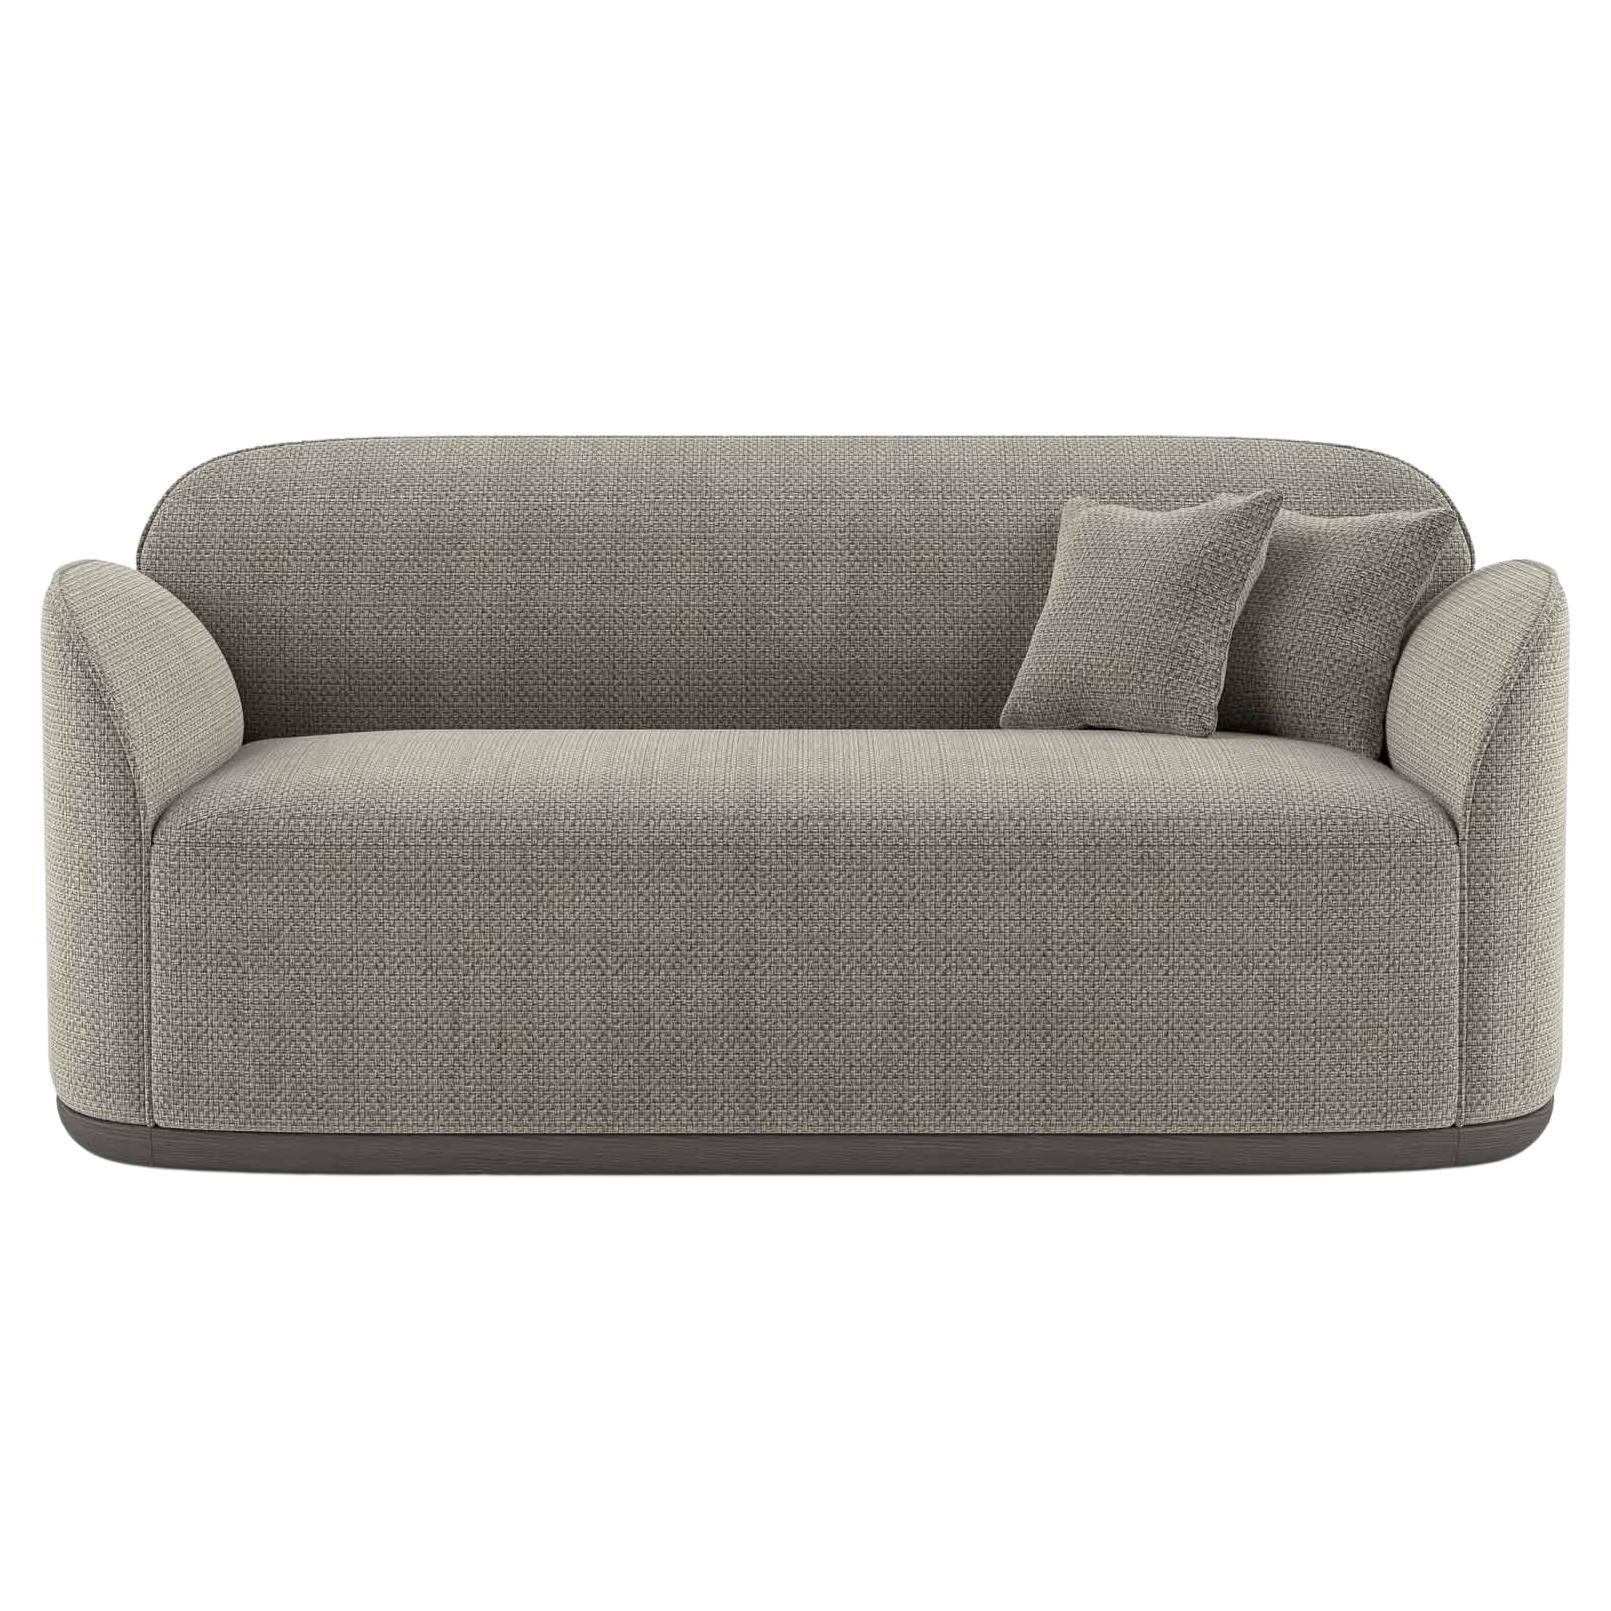 Unio Loveseat Upholstered with the Pierre Frey Hanoi Fabric by Poiat For Sale